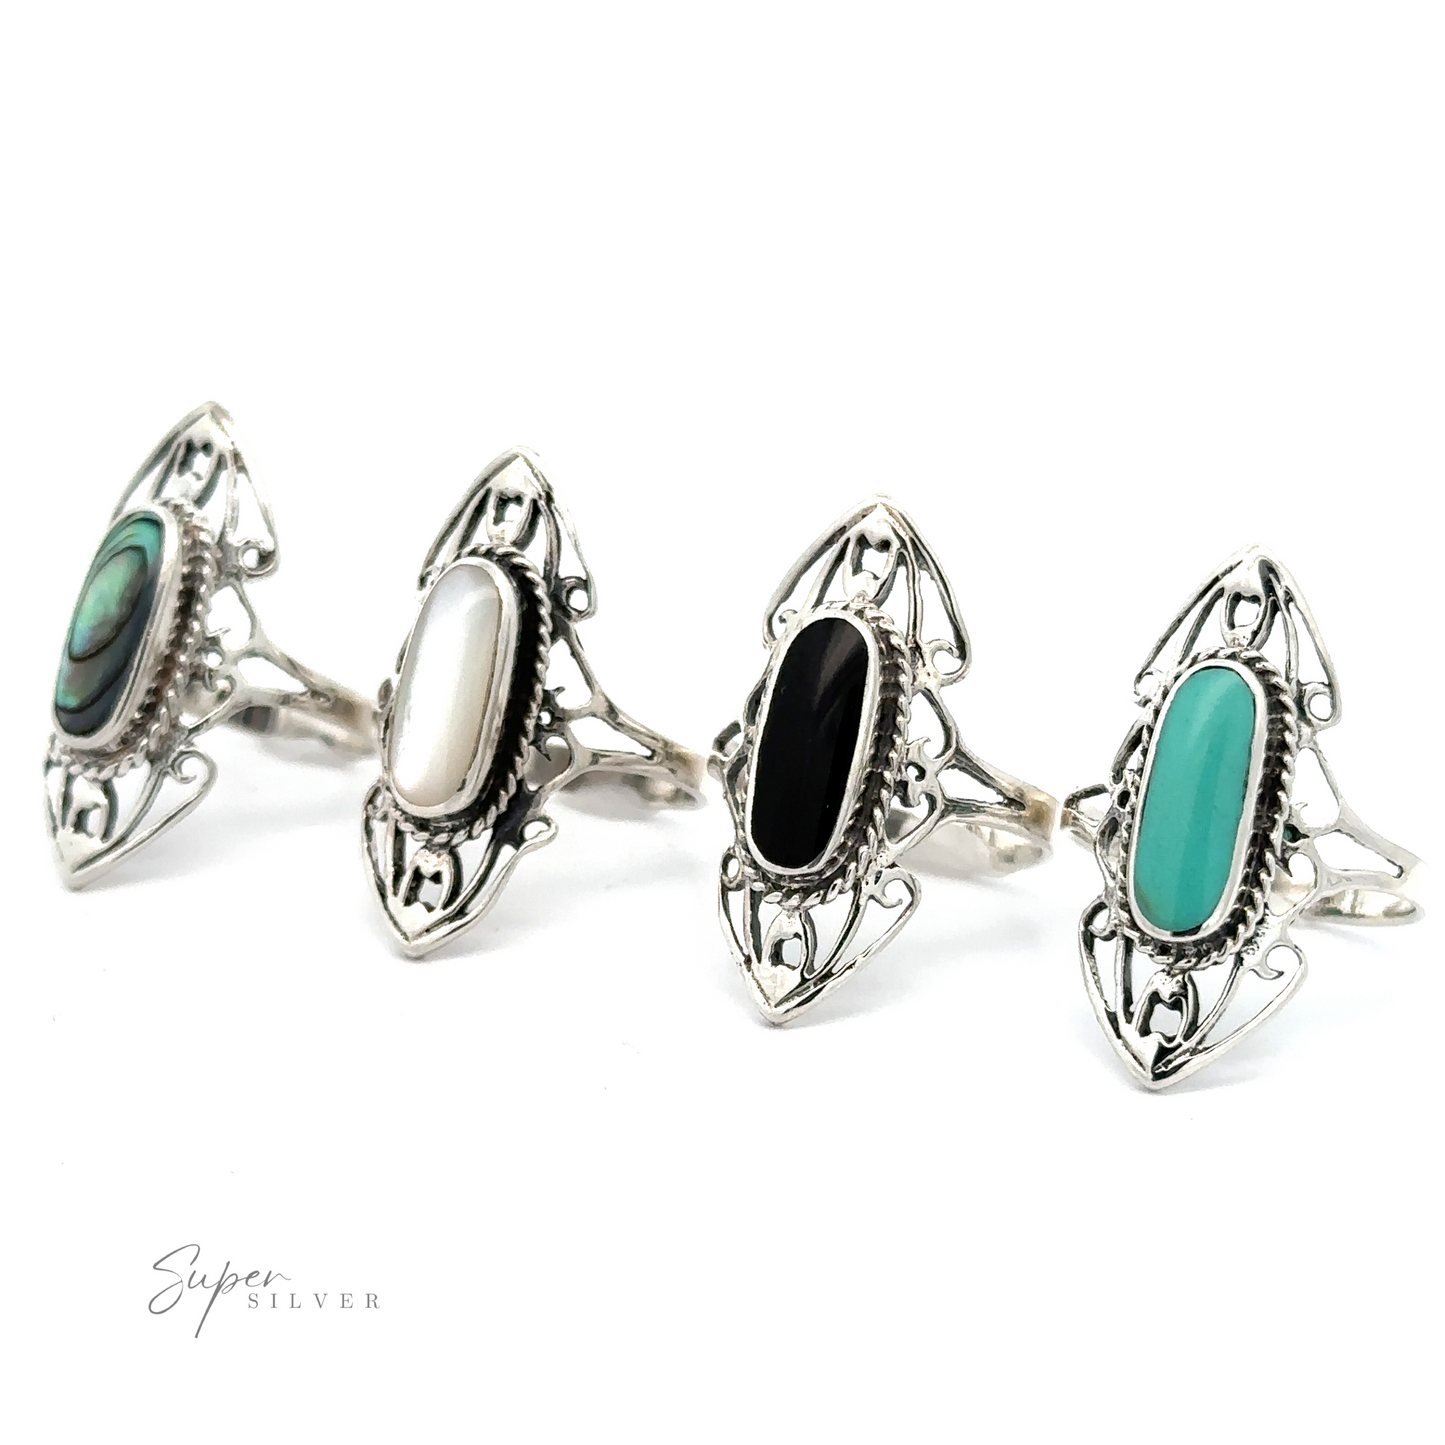 A collection of four Elongated Filigree Rings With Oval Inlaid Stones on a white background.